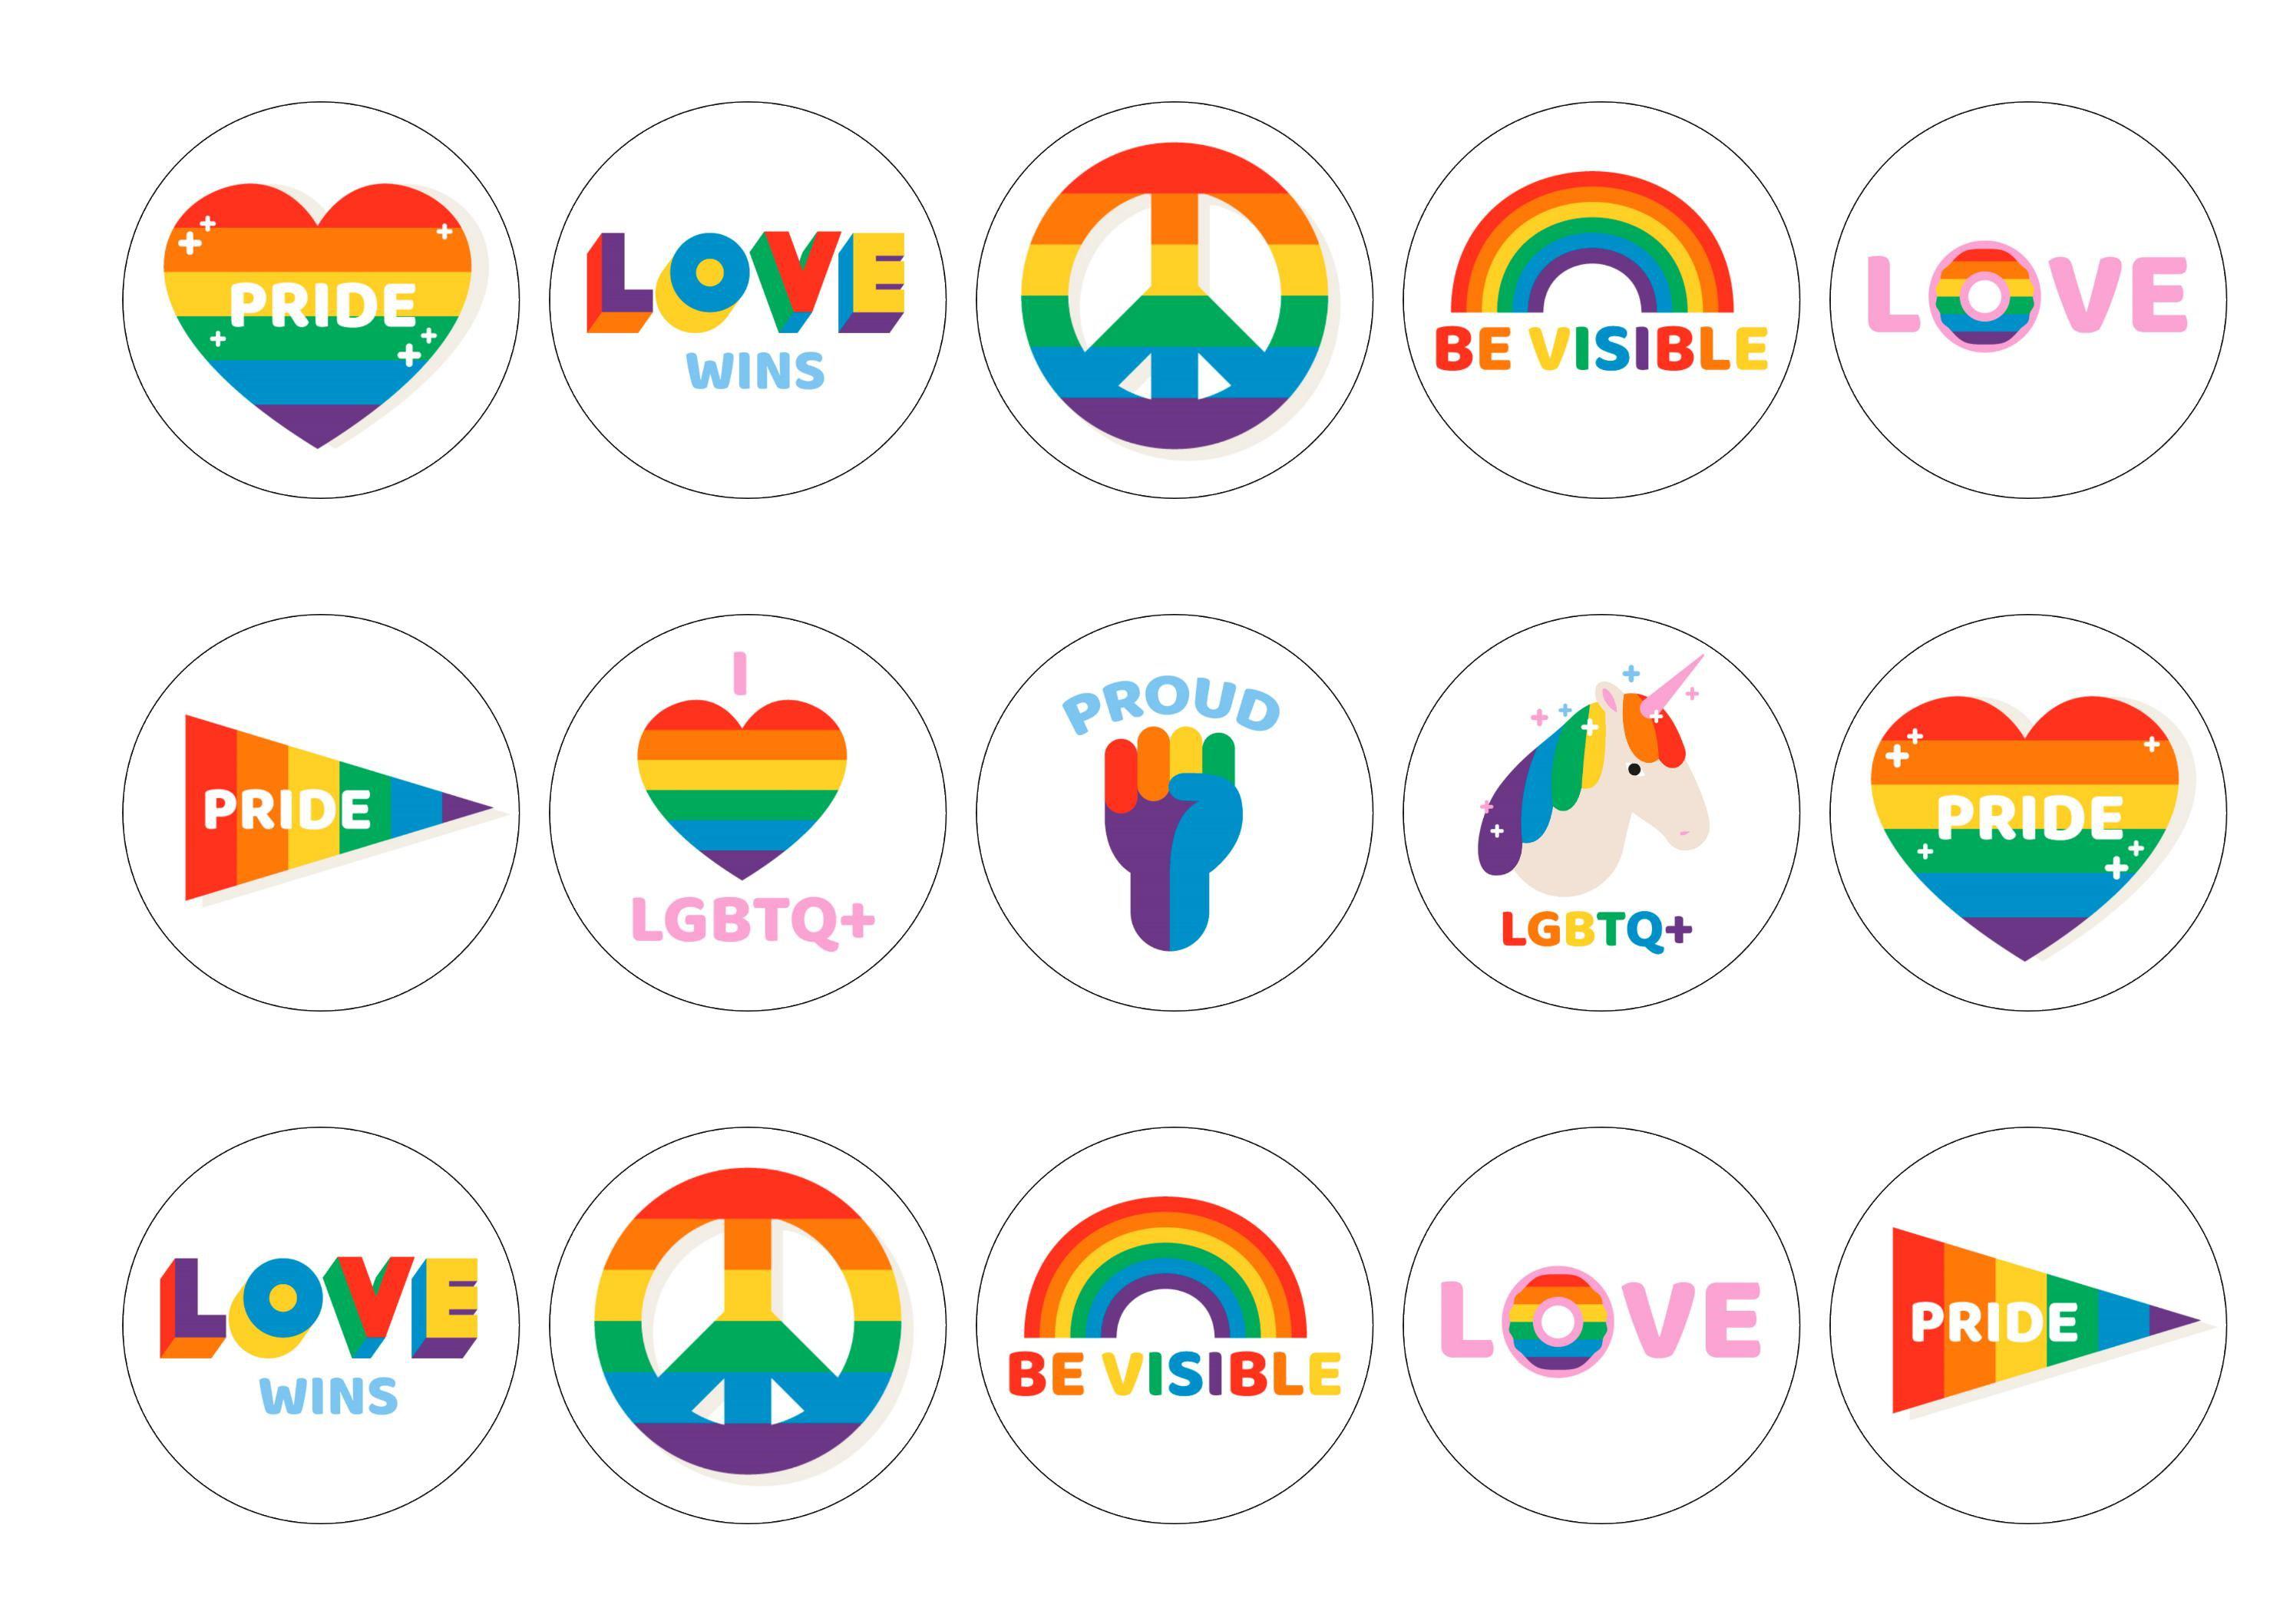 15 cupcake toppers with pride icons